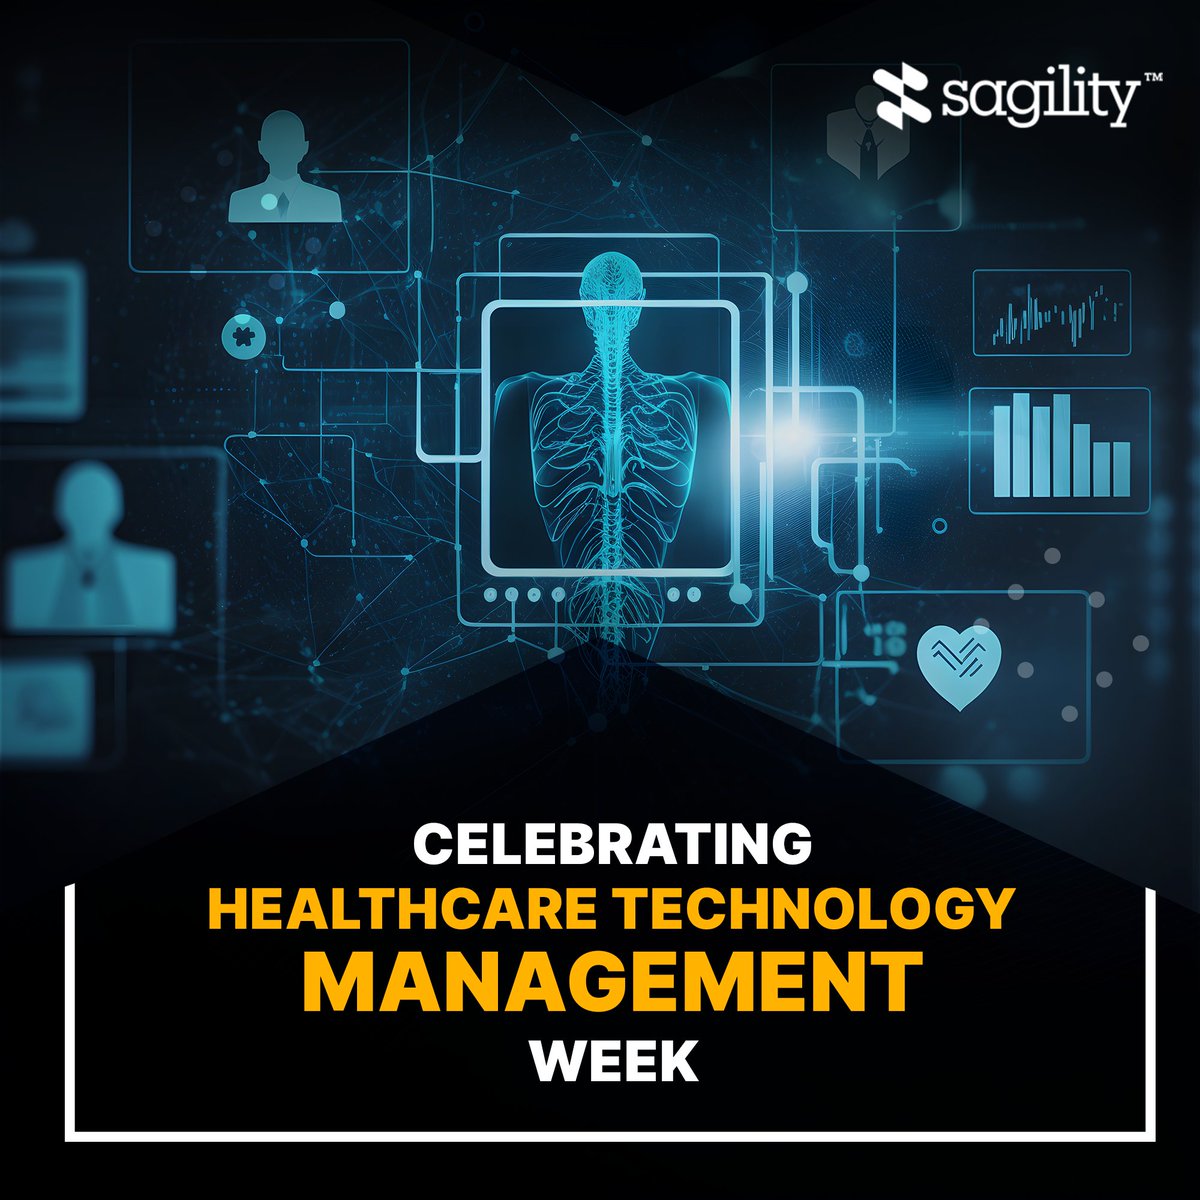 This Healthcare Technology Management Week, we celebrate the dedicated professionals who keep our medical technology running smoothly.

Thank you for all that you do! ​

#Sagility #WeAreSagility #SOARWithSagility #HTMWeek #HealthcareTechnologyManagement #PatientSafety